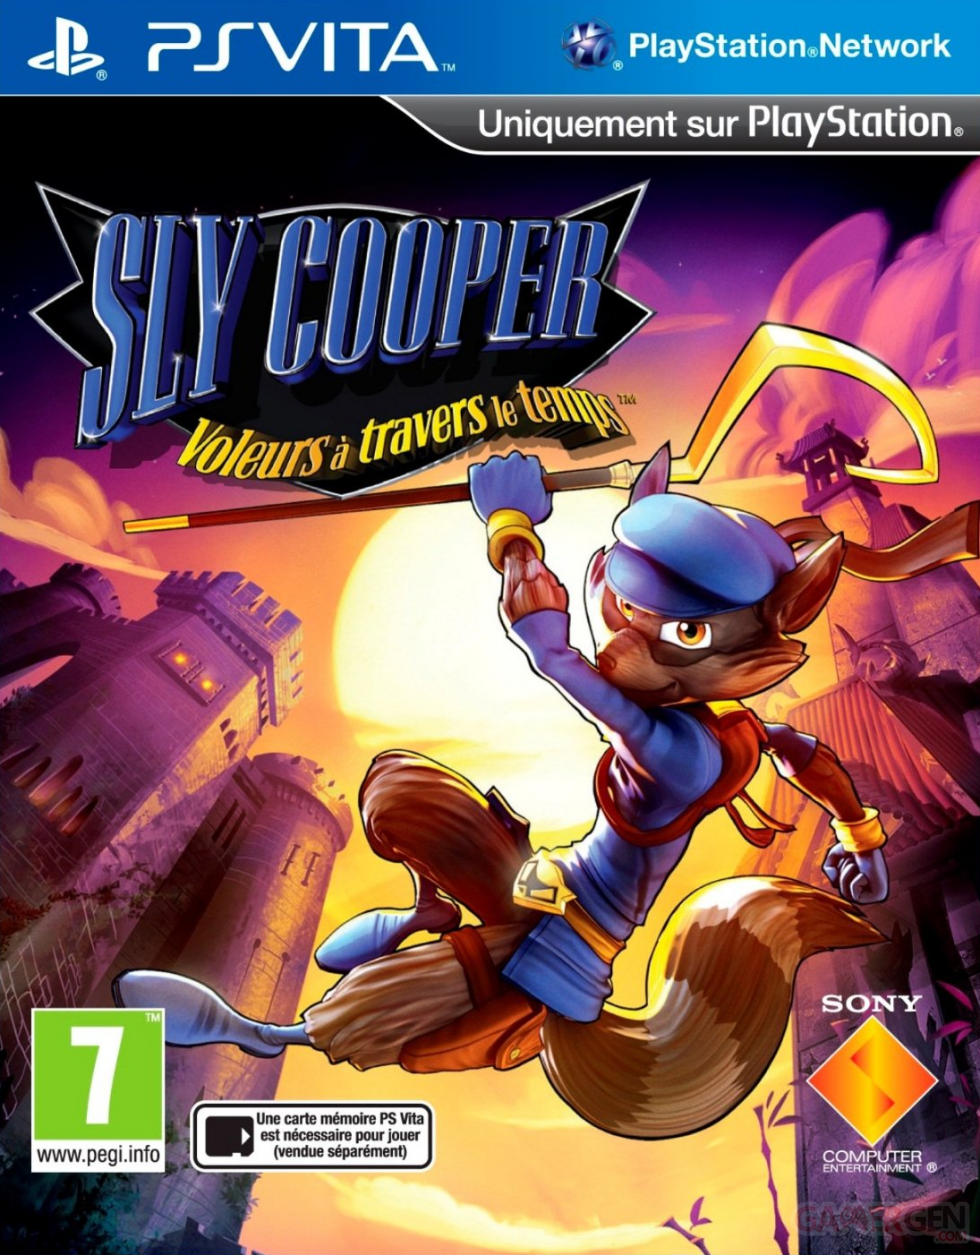 Sly Coopers logo vignette jaquette covers 10.12.2012.